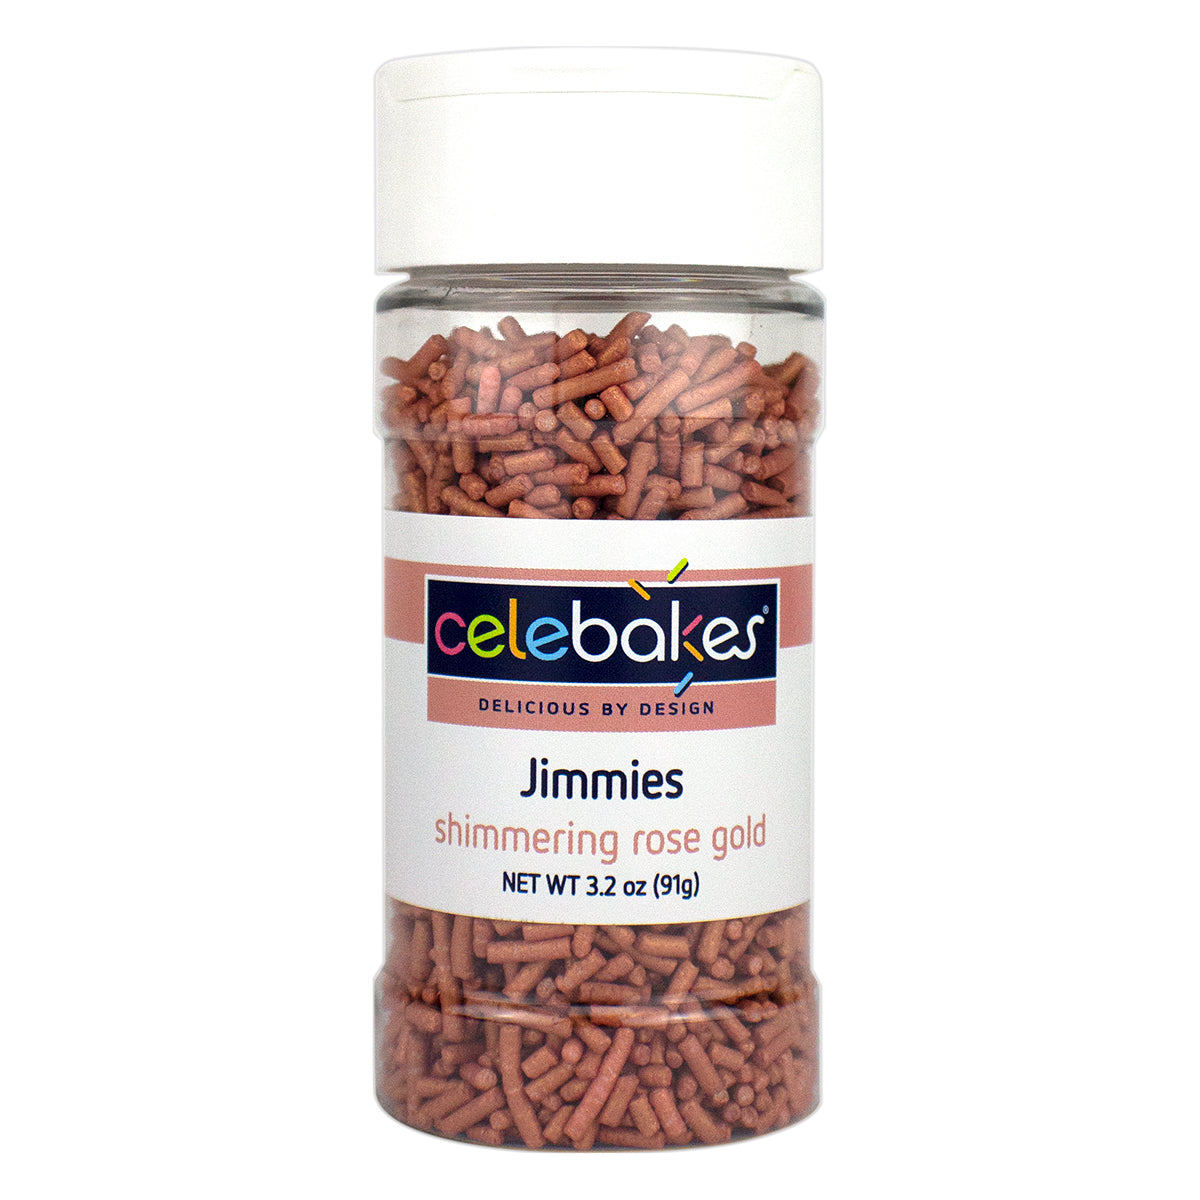 CK Jimmies Shimmering Rose Gold 3.2oz CK Products Sprinkles - Bake Supply Plus